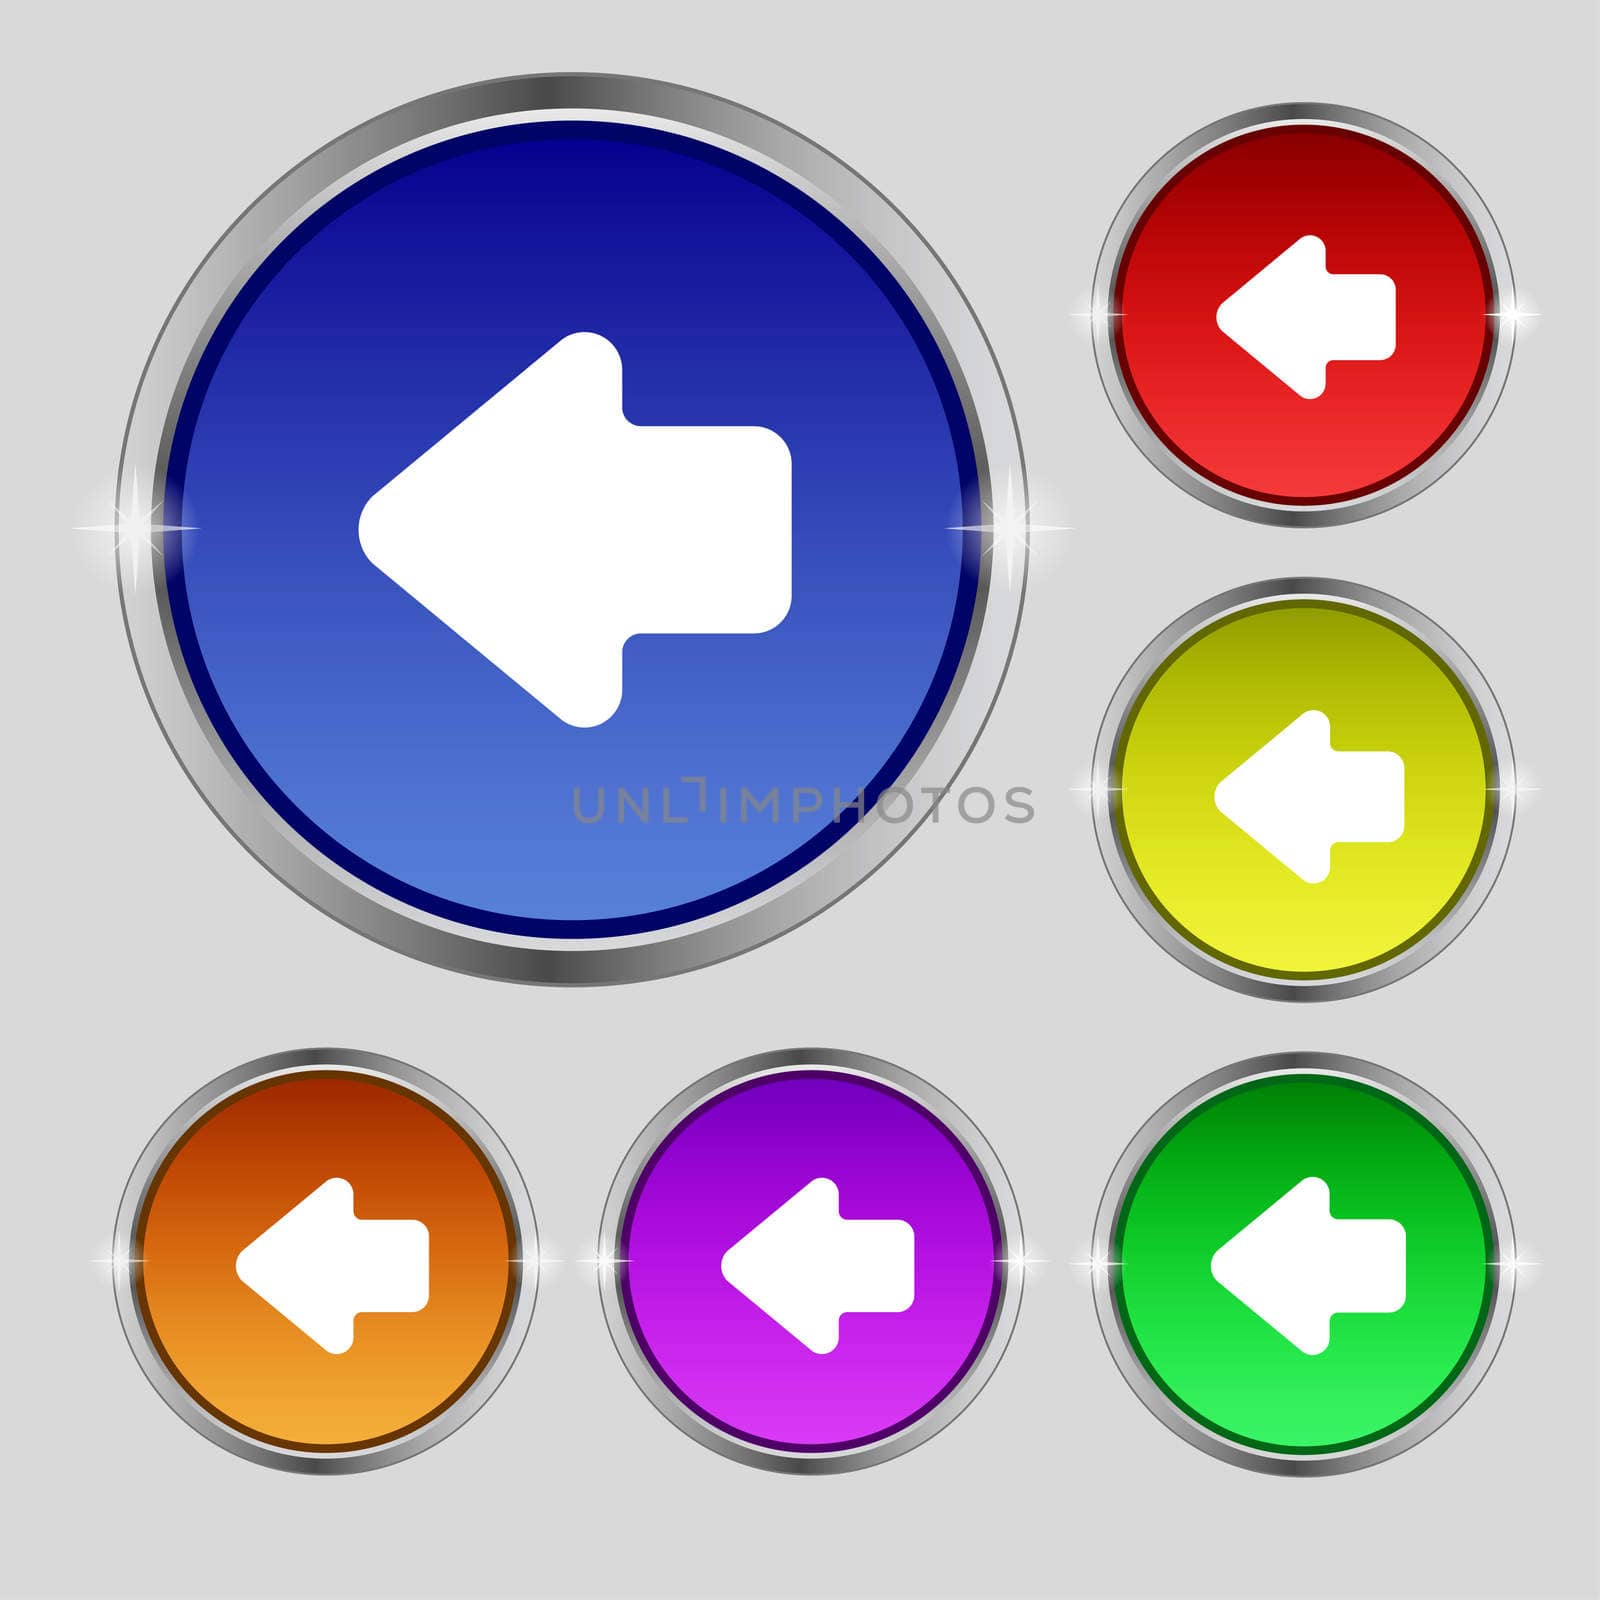 Arrow left, Way out icon sign. Round symbol on bright colourful buttons. illustration